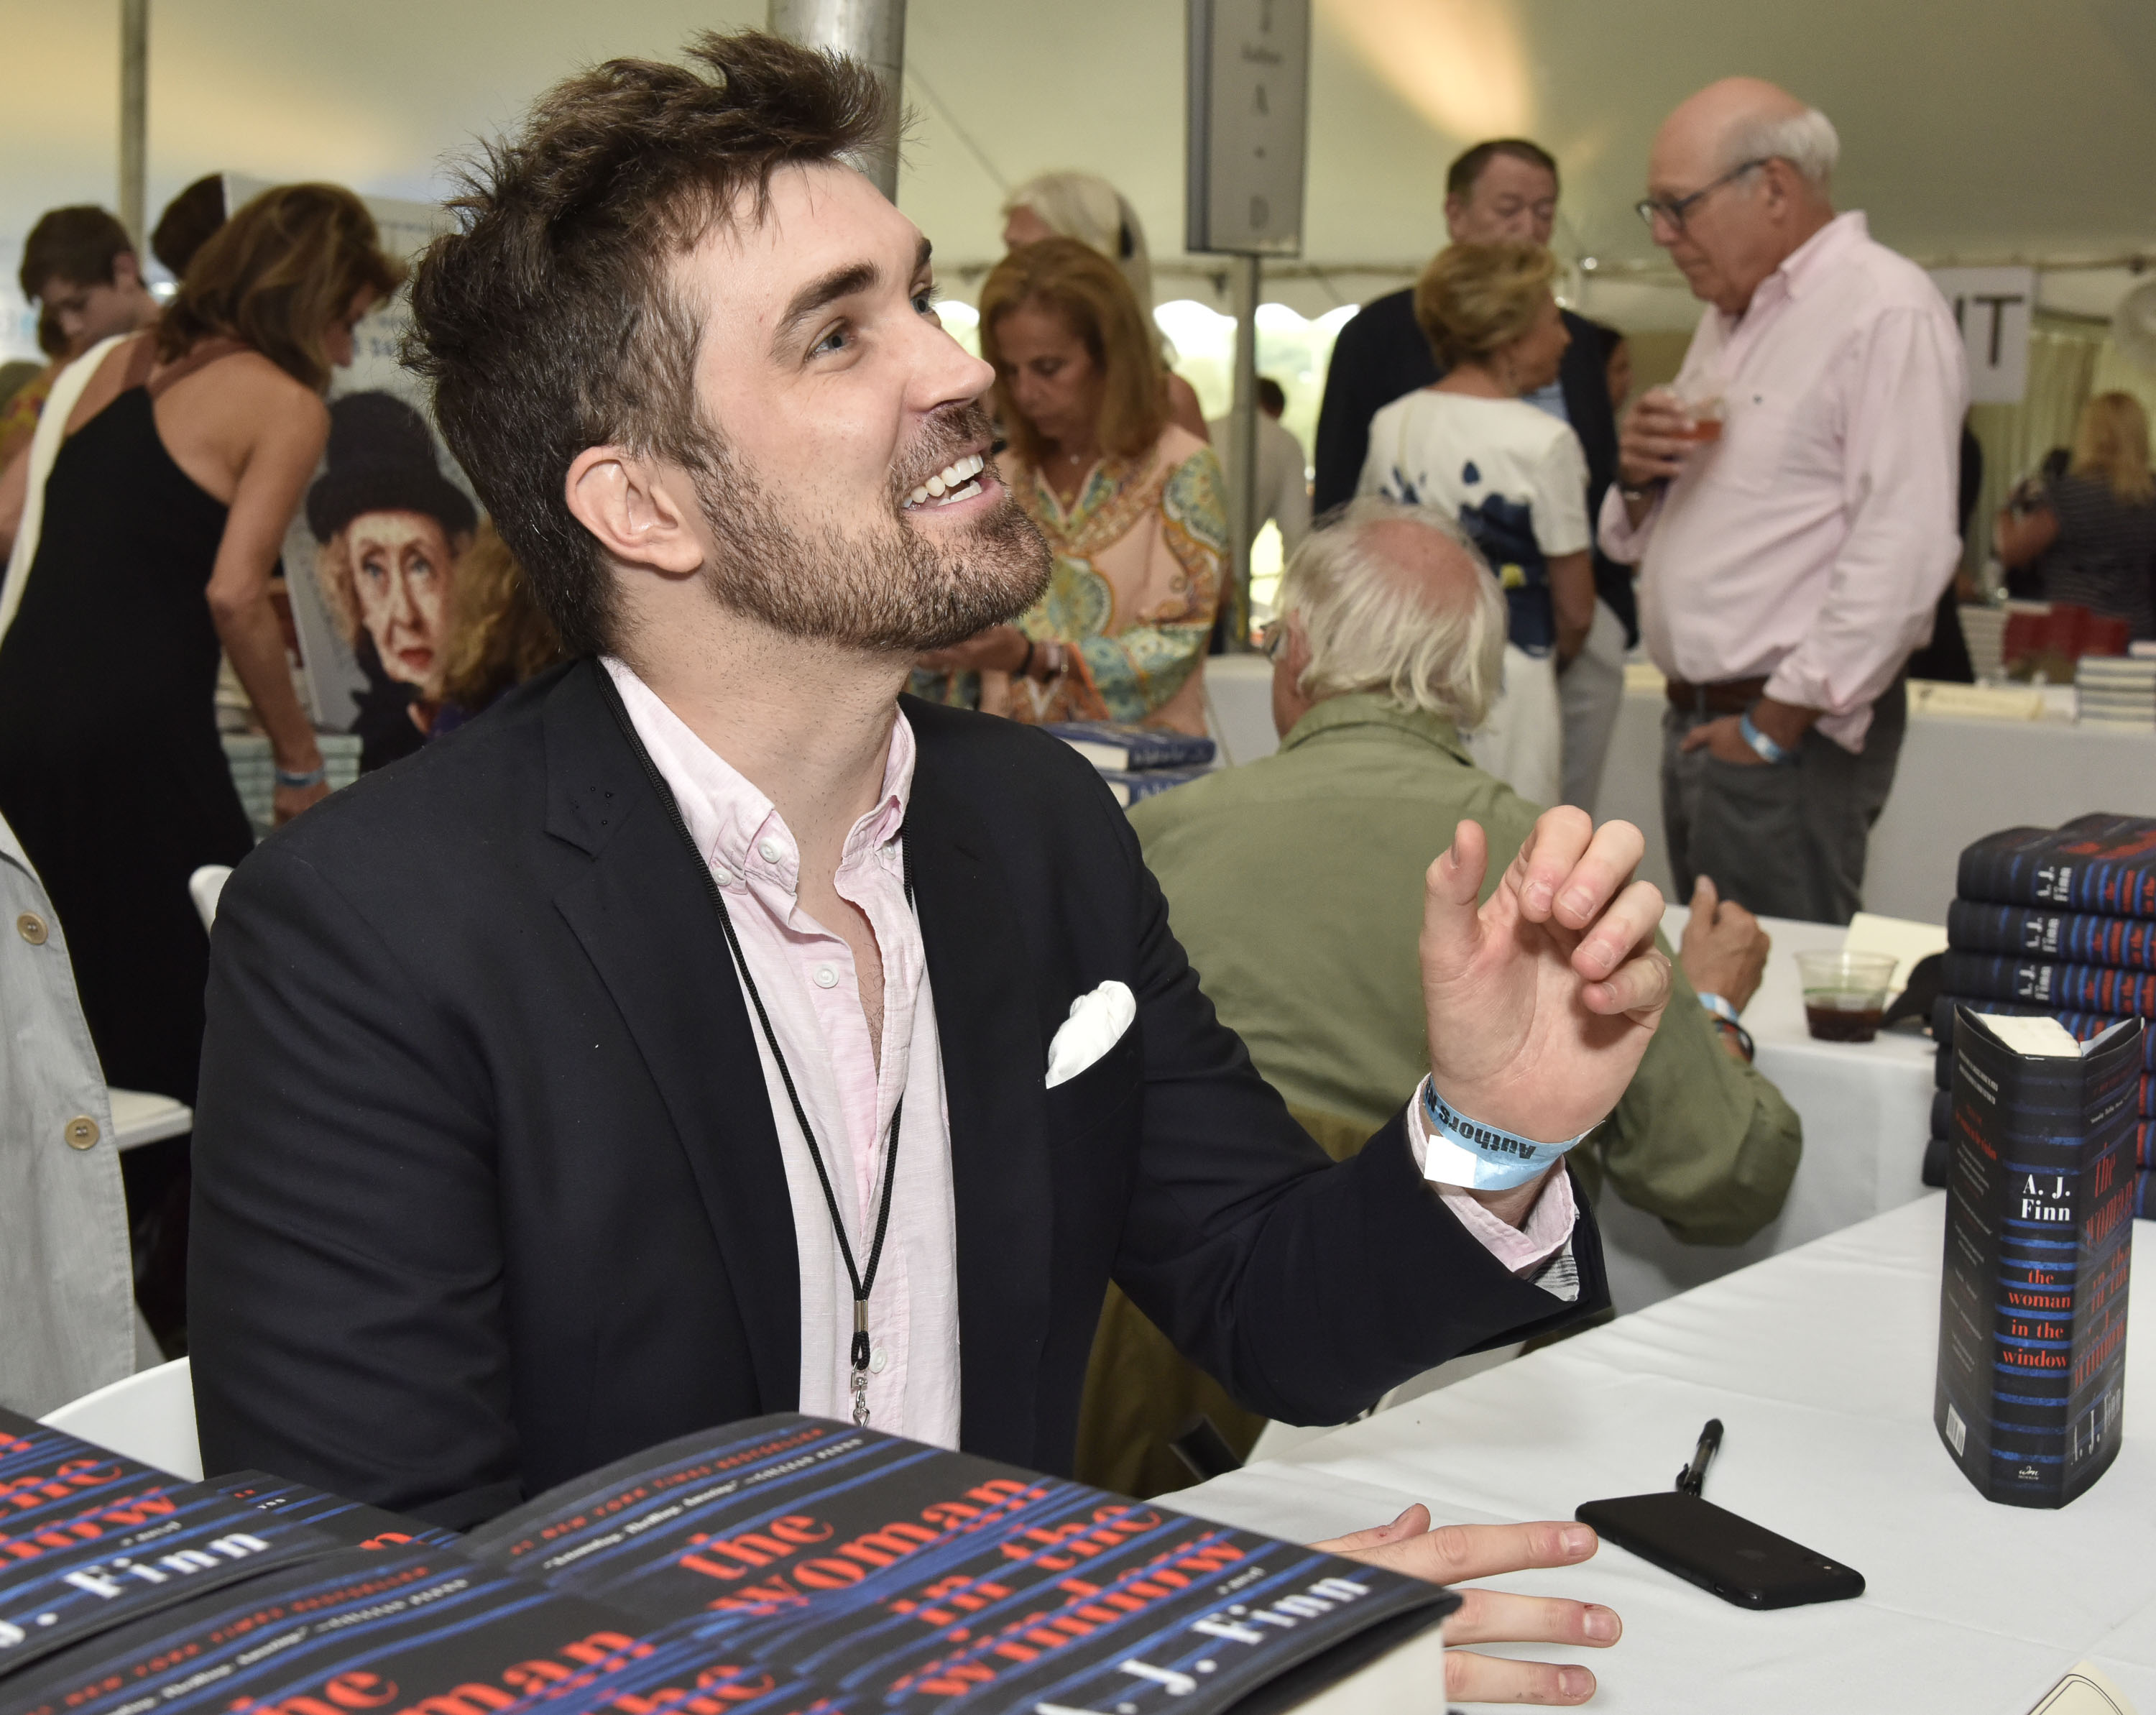 A.J. Finn (Dan Mallory) attends Authors Night at East Hampton Library on August 11, 2018 in East Hampton, New York. (Getty Images for East Hampton Li—2018 Getty Images)